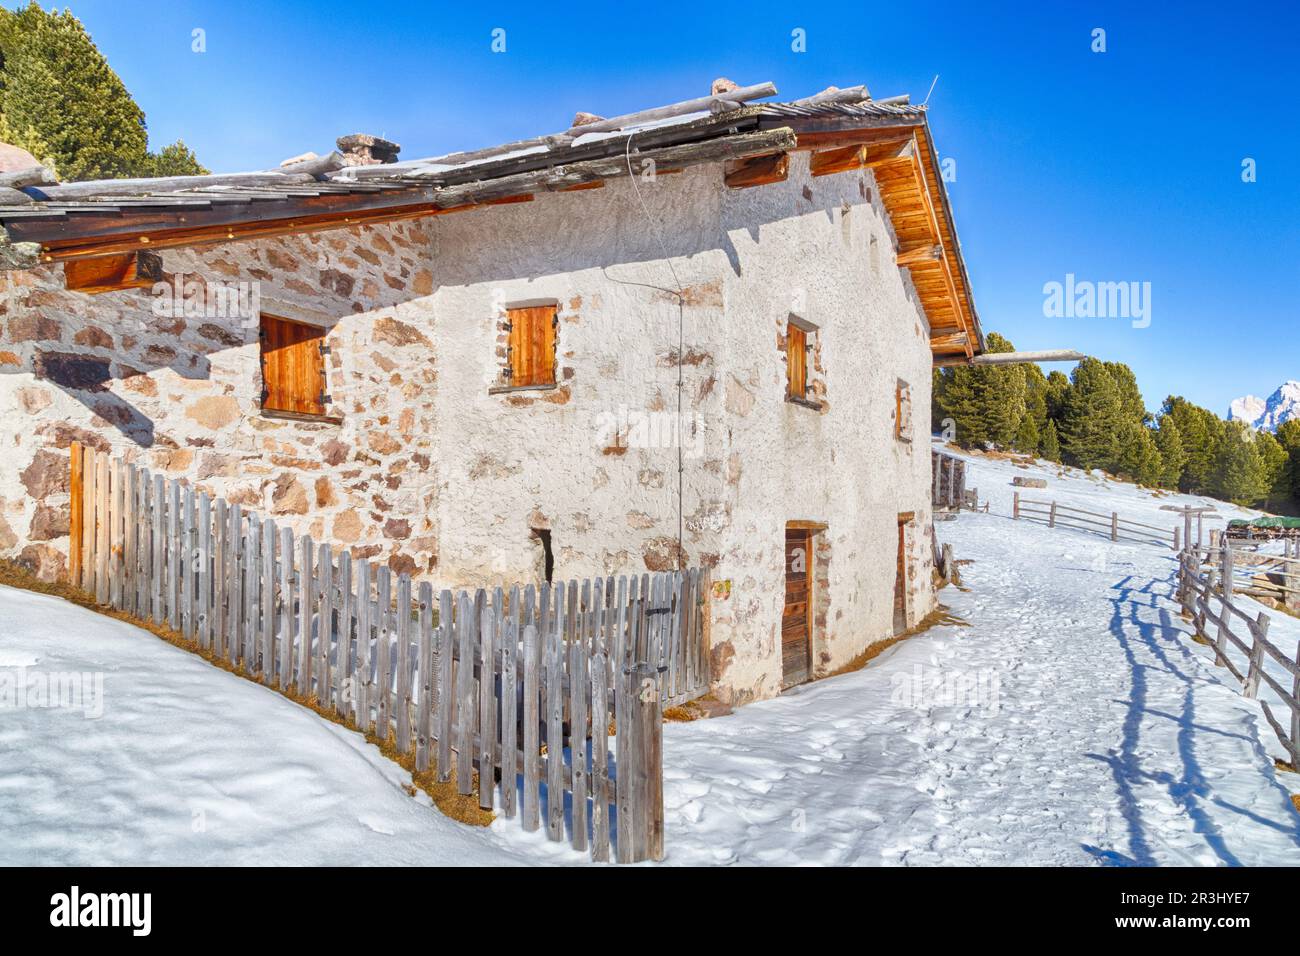 High-altitude mountain hut among snow-capped peaks and pine forest Stock Photo